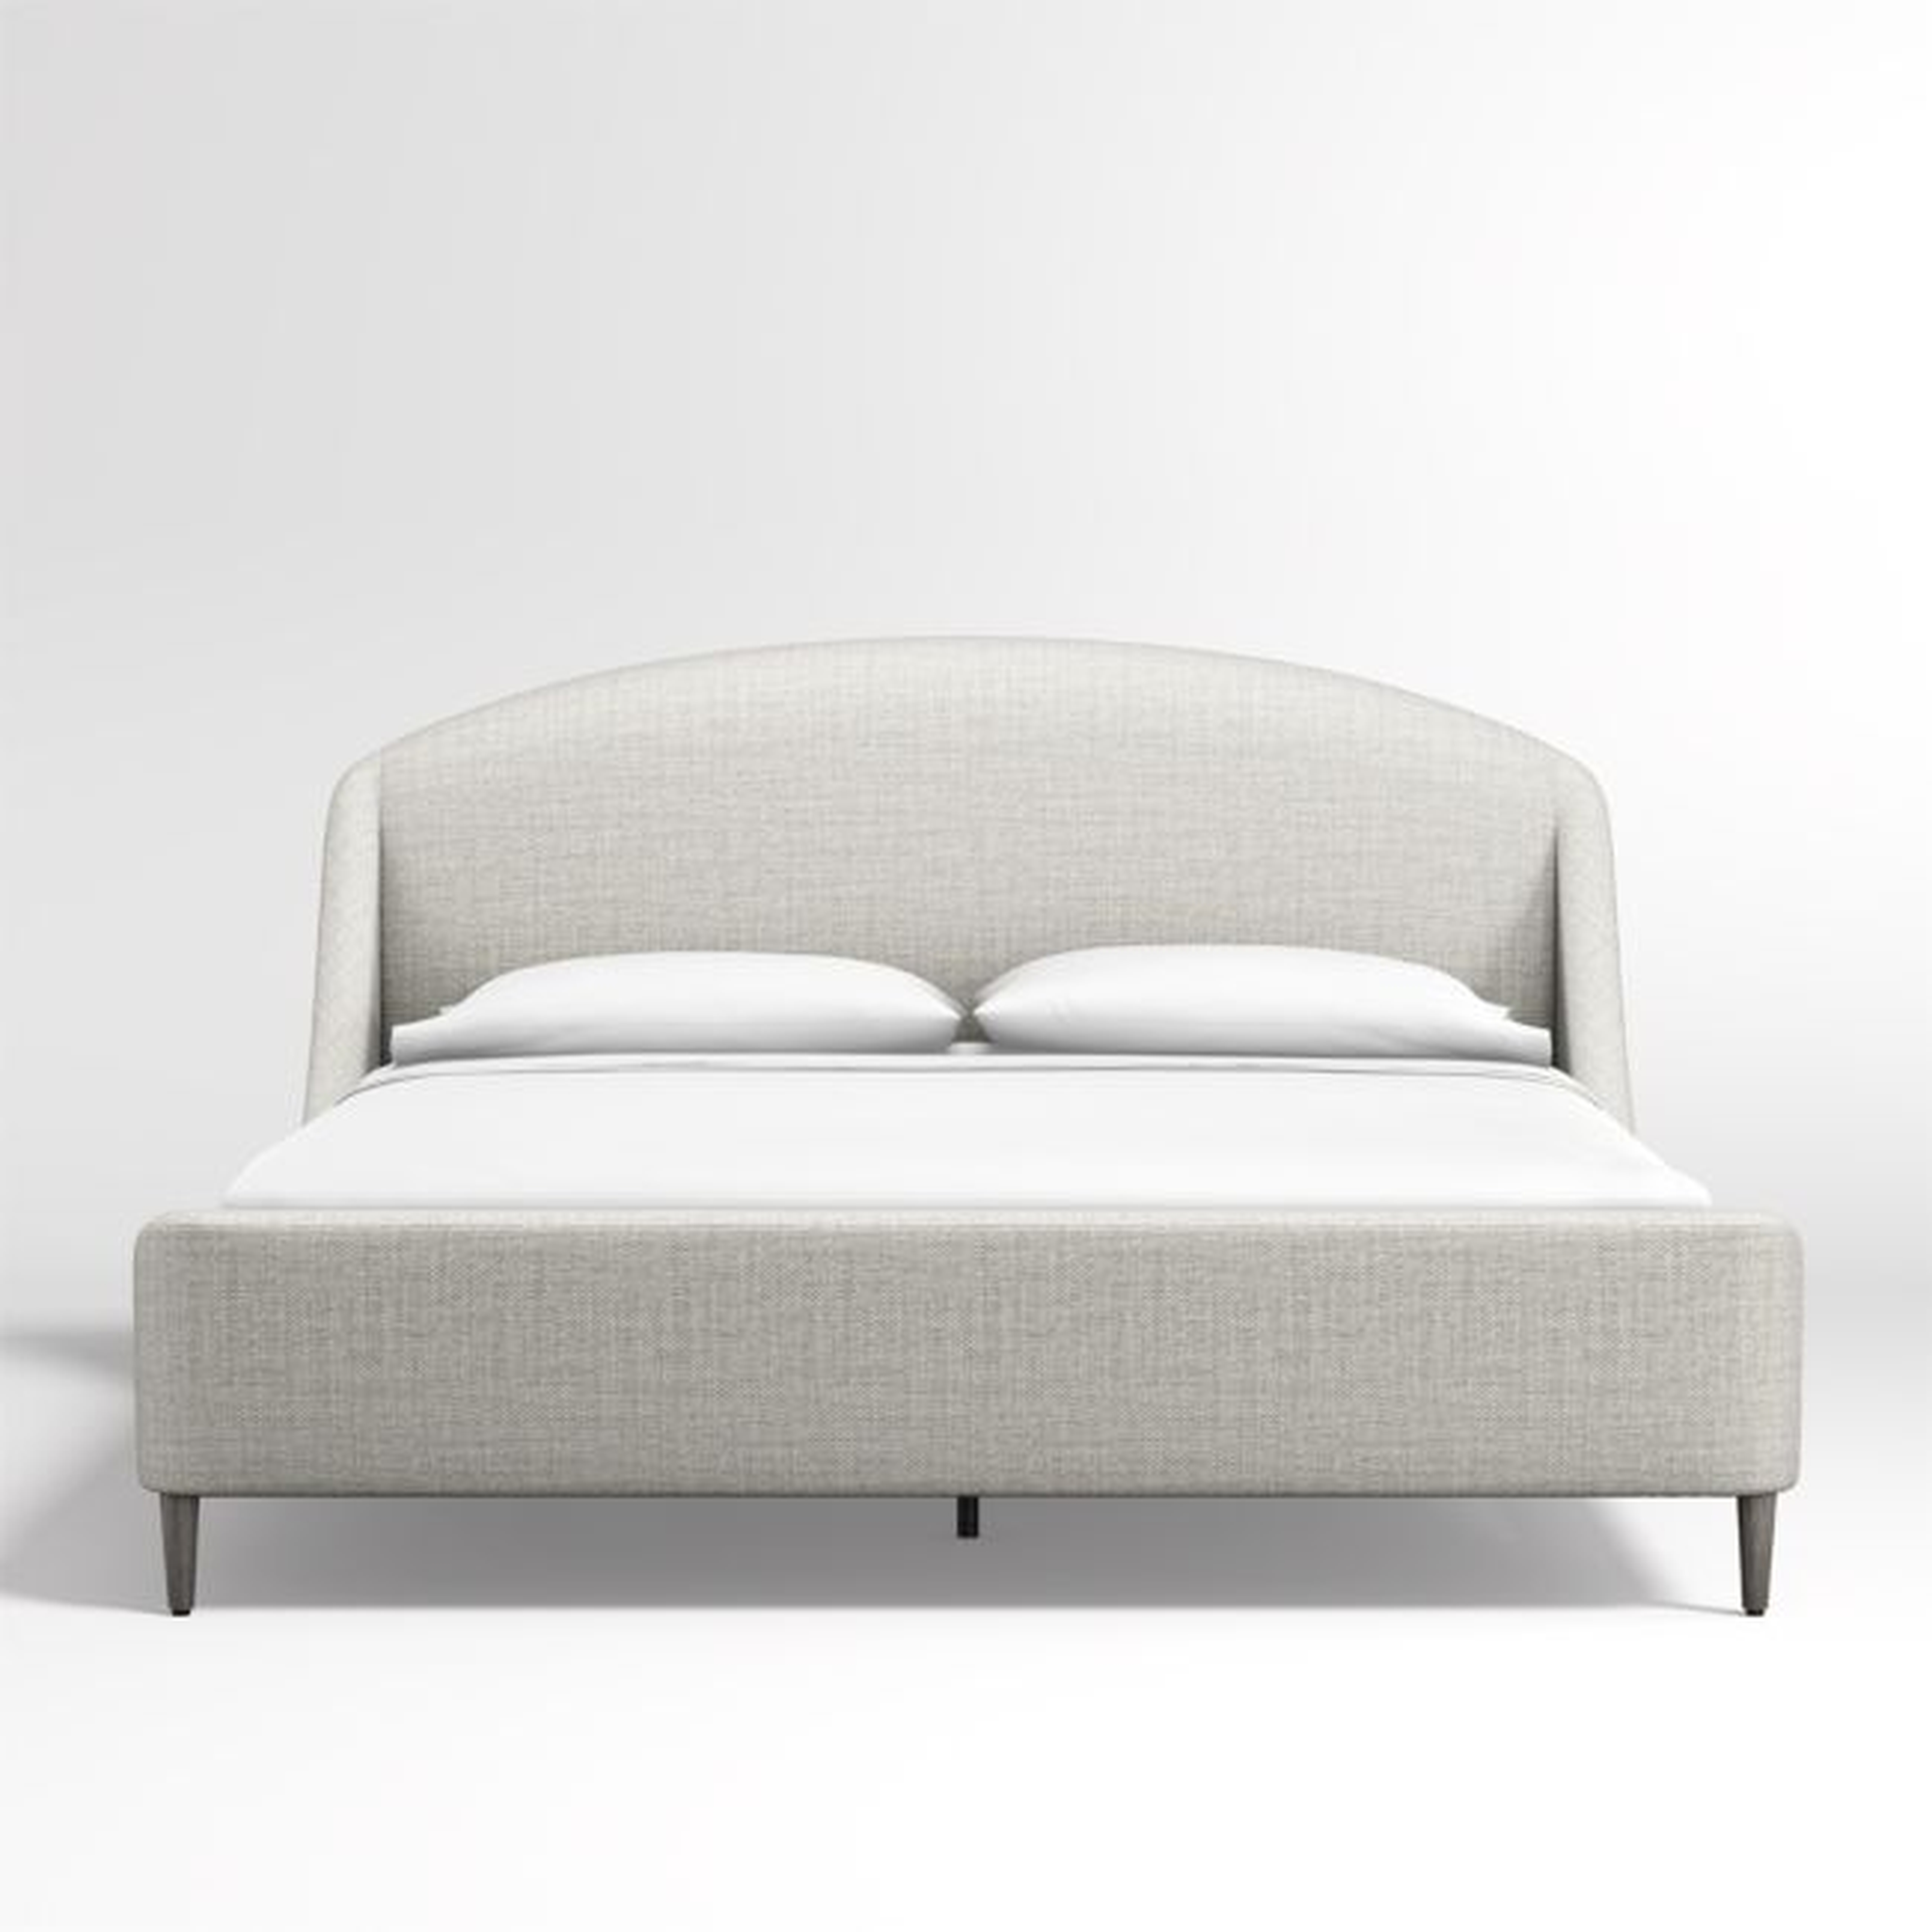 Lafayette Mist Upholstered King Bed - Backordered Until Mid-May - Crate and Barrel